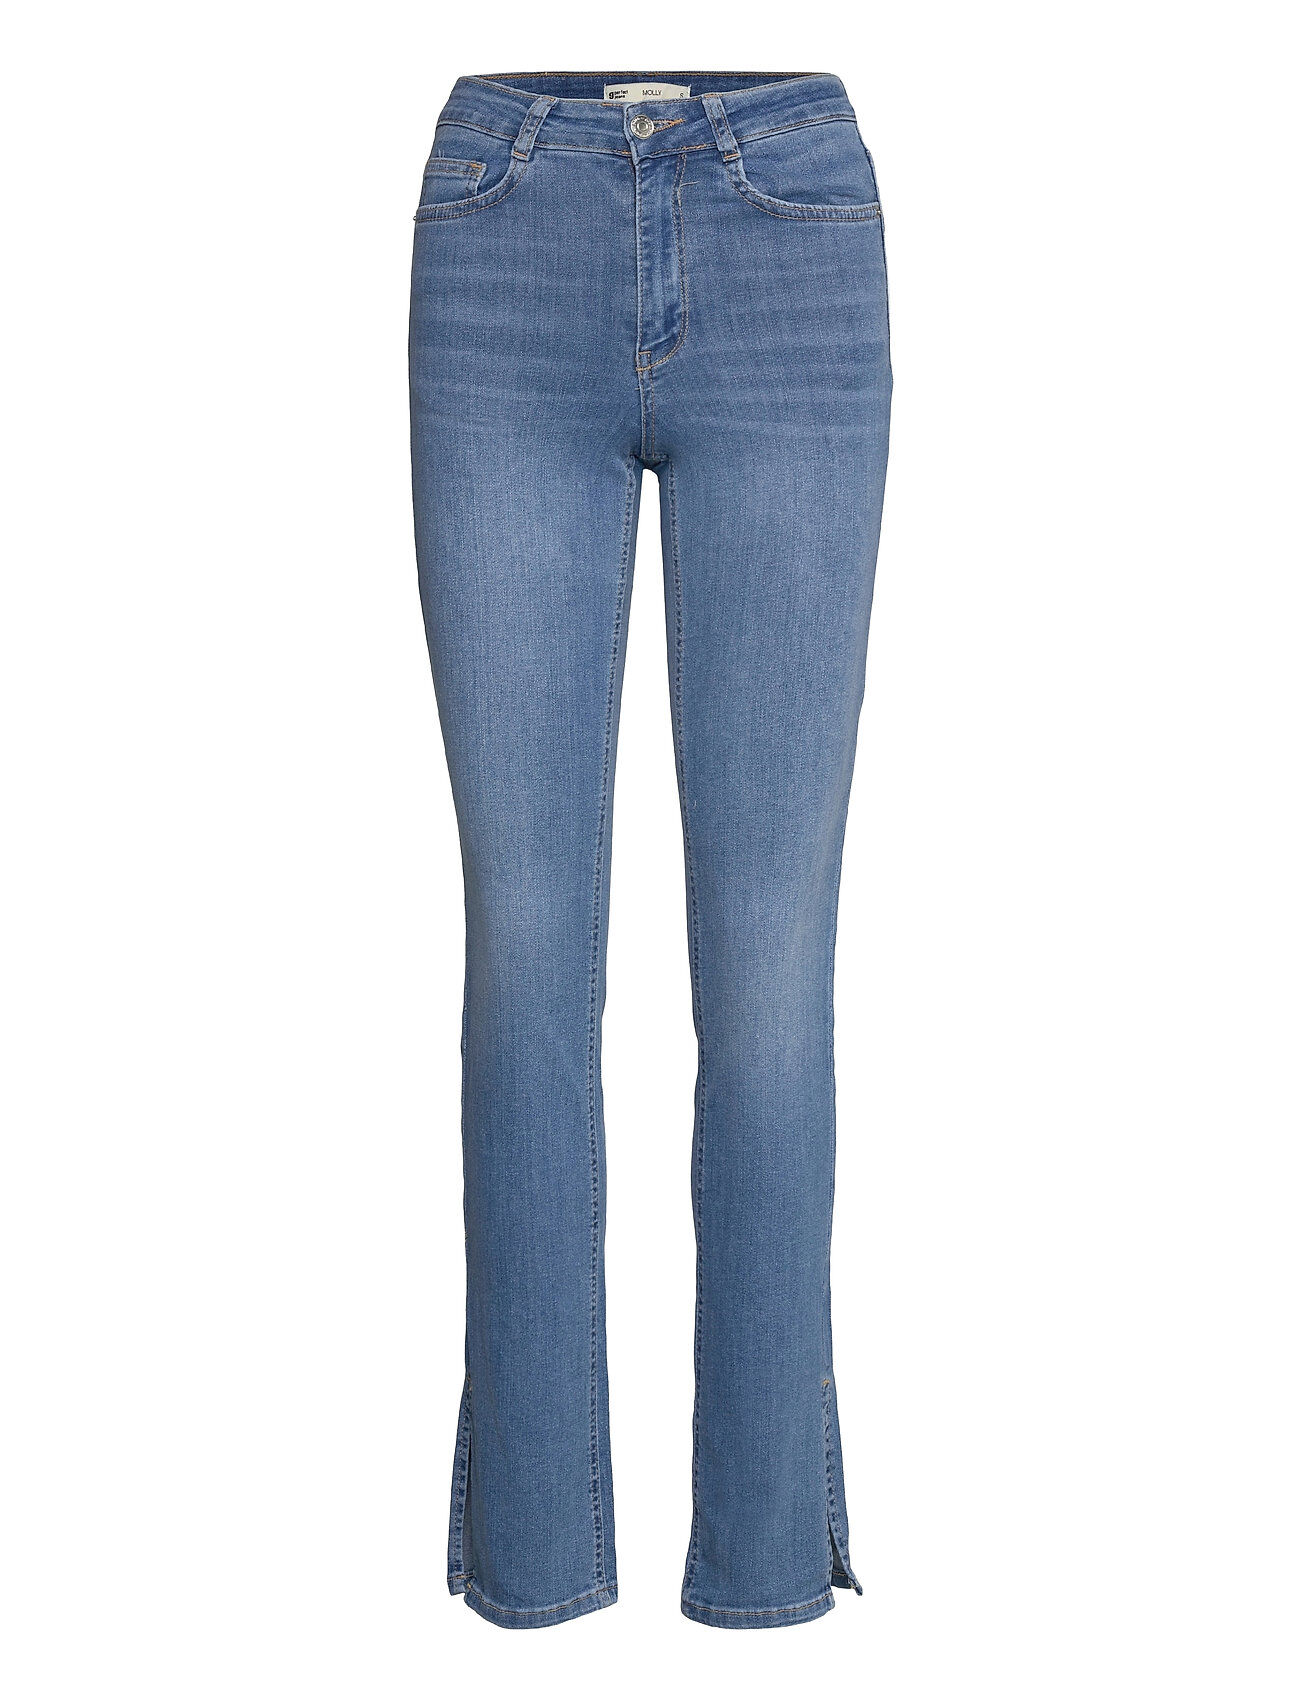 Gina Tricot Molly Slit Jeans Jeans Boot Cut Blå Gina Tricot